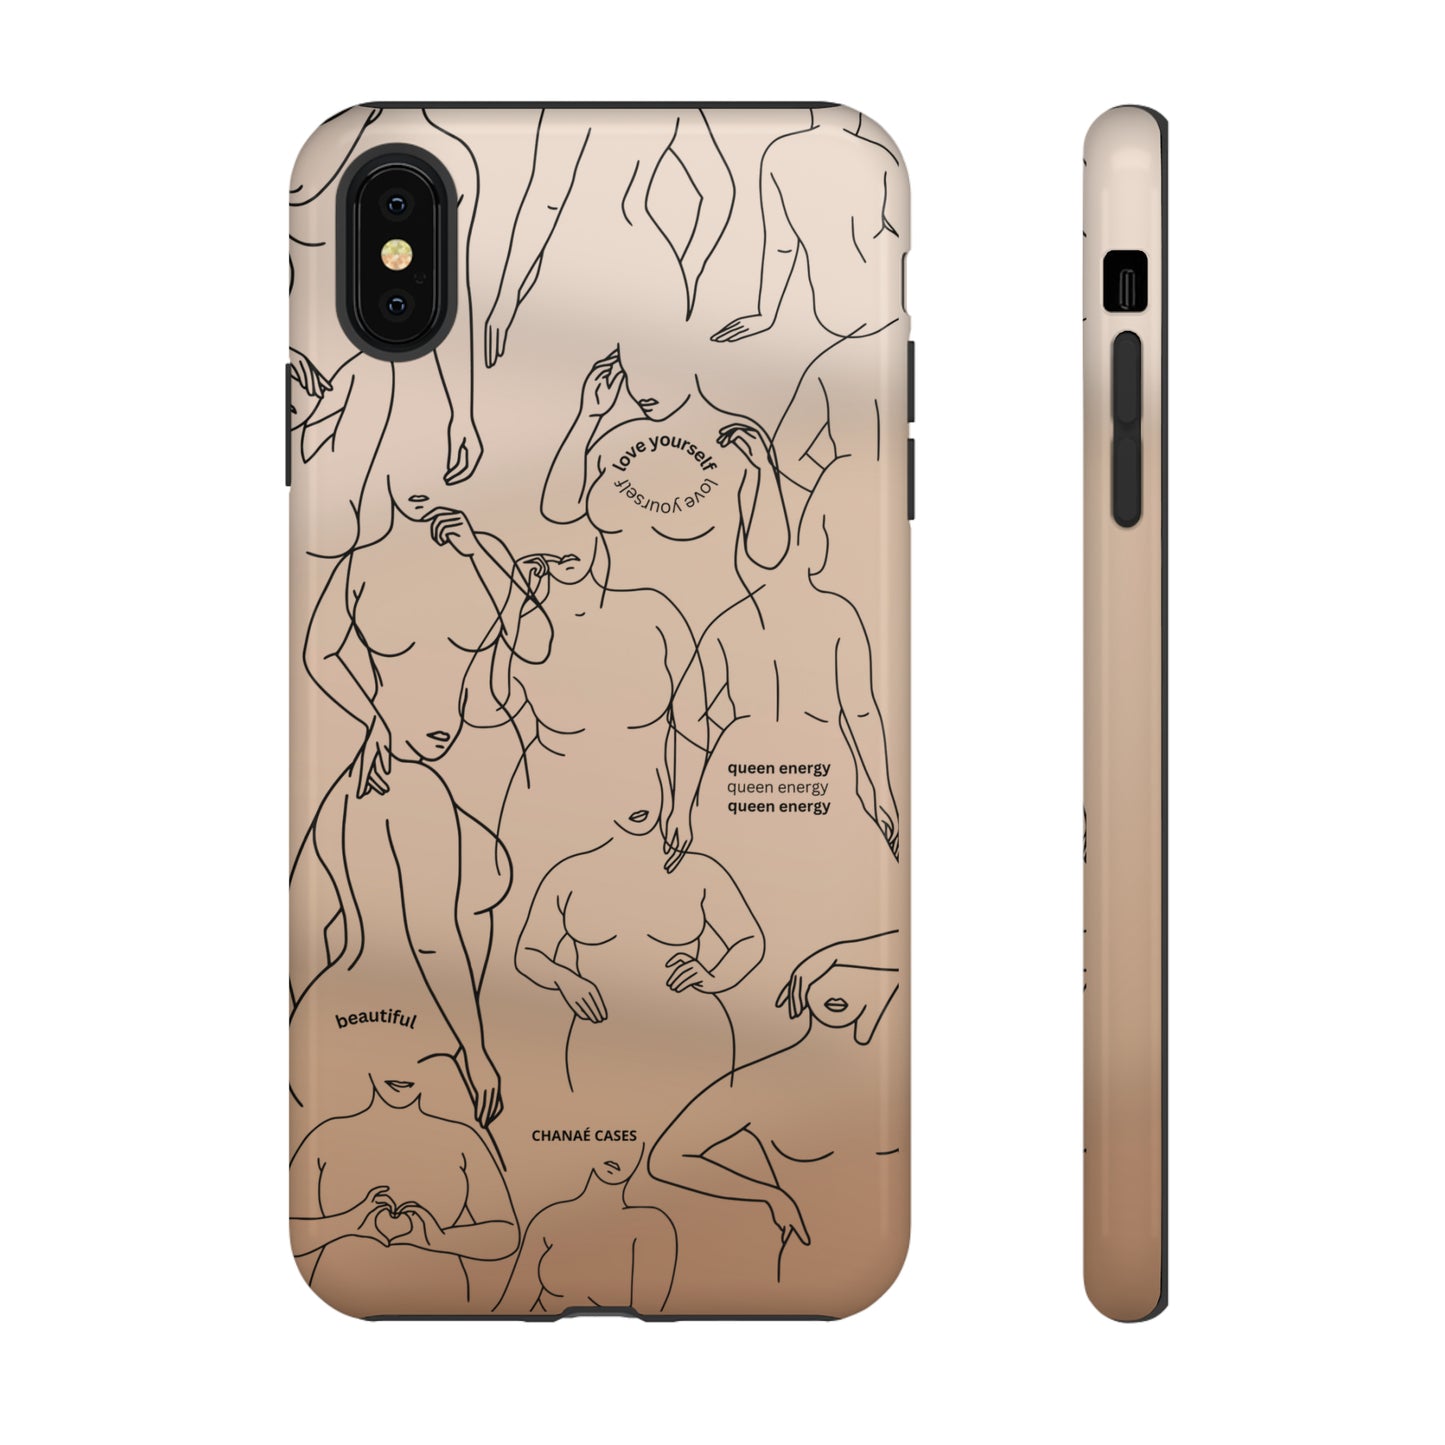 Love Your Body iPhone "Tough" Case (Nude)